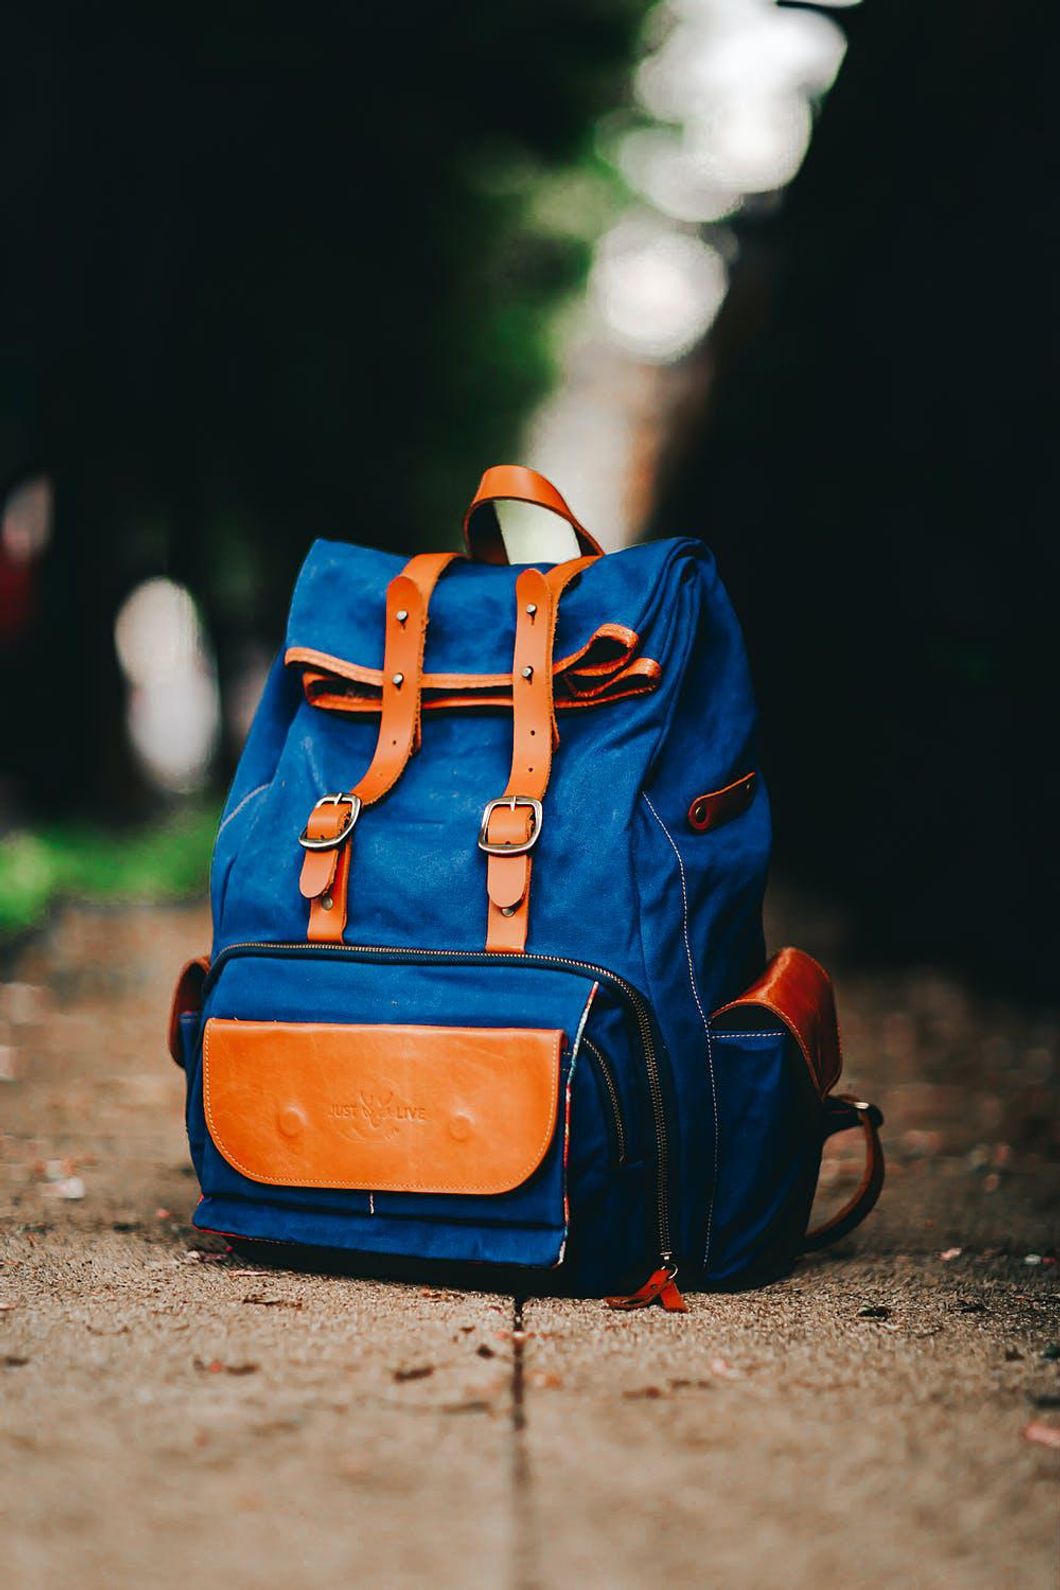 30 Necessities To Carry In Your School Bag — Besides Your Paper, Textbooks, And Pencils